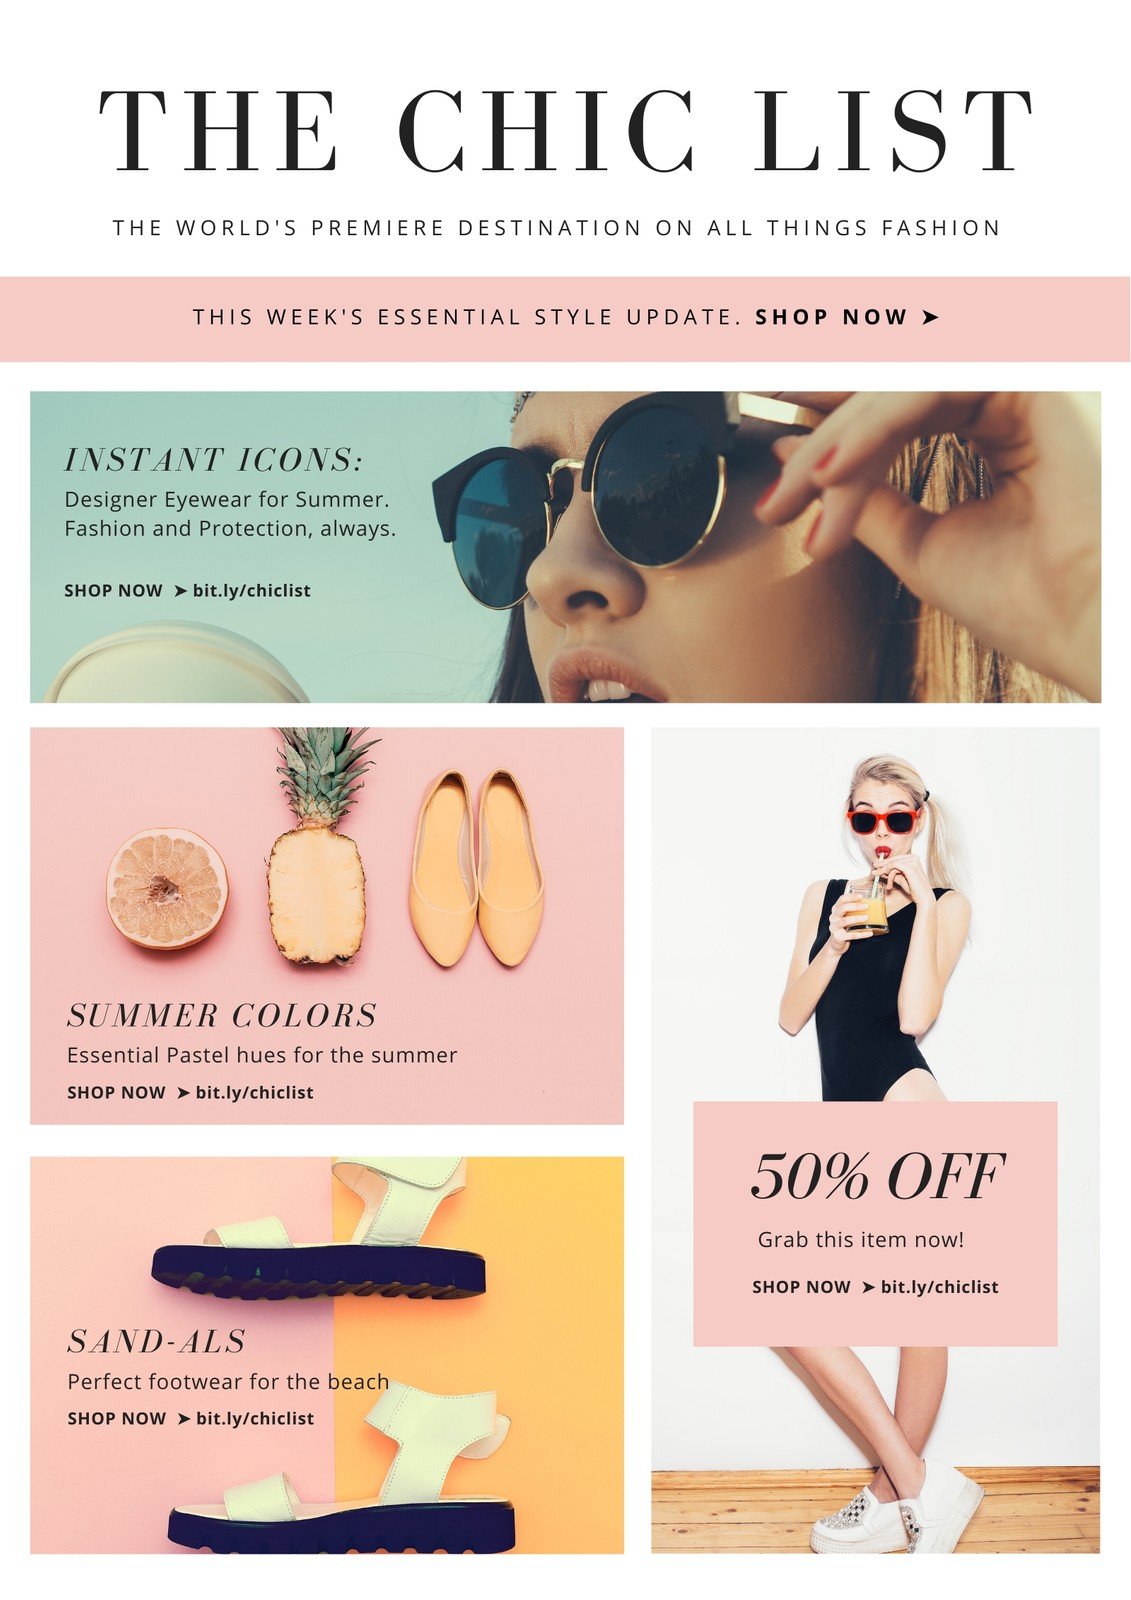 Pink Simple Fashion Newsletter - Templates by Canva